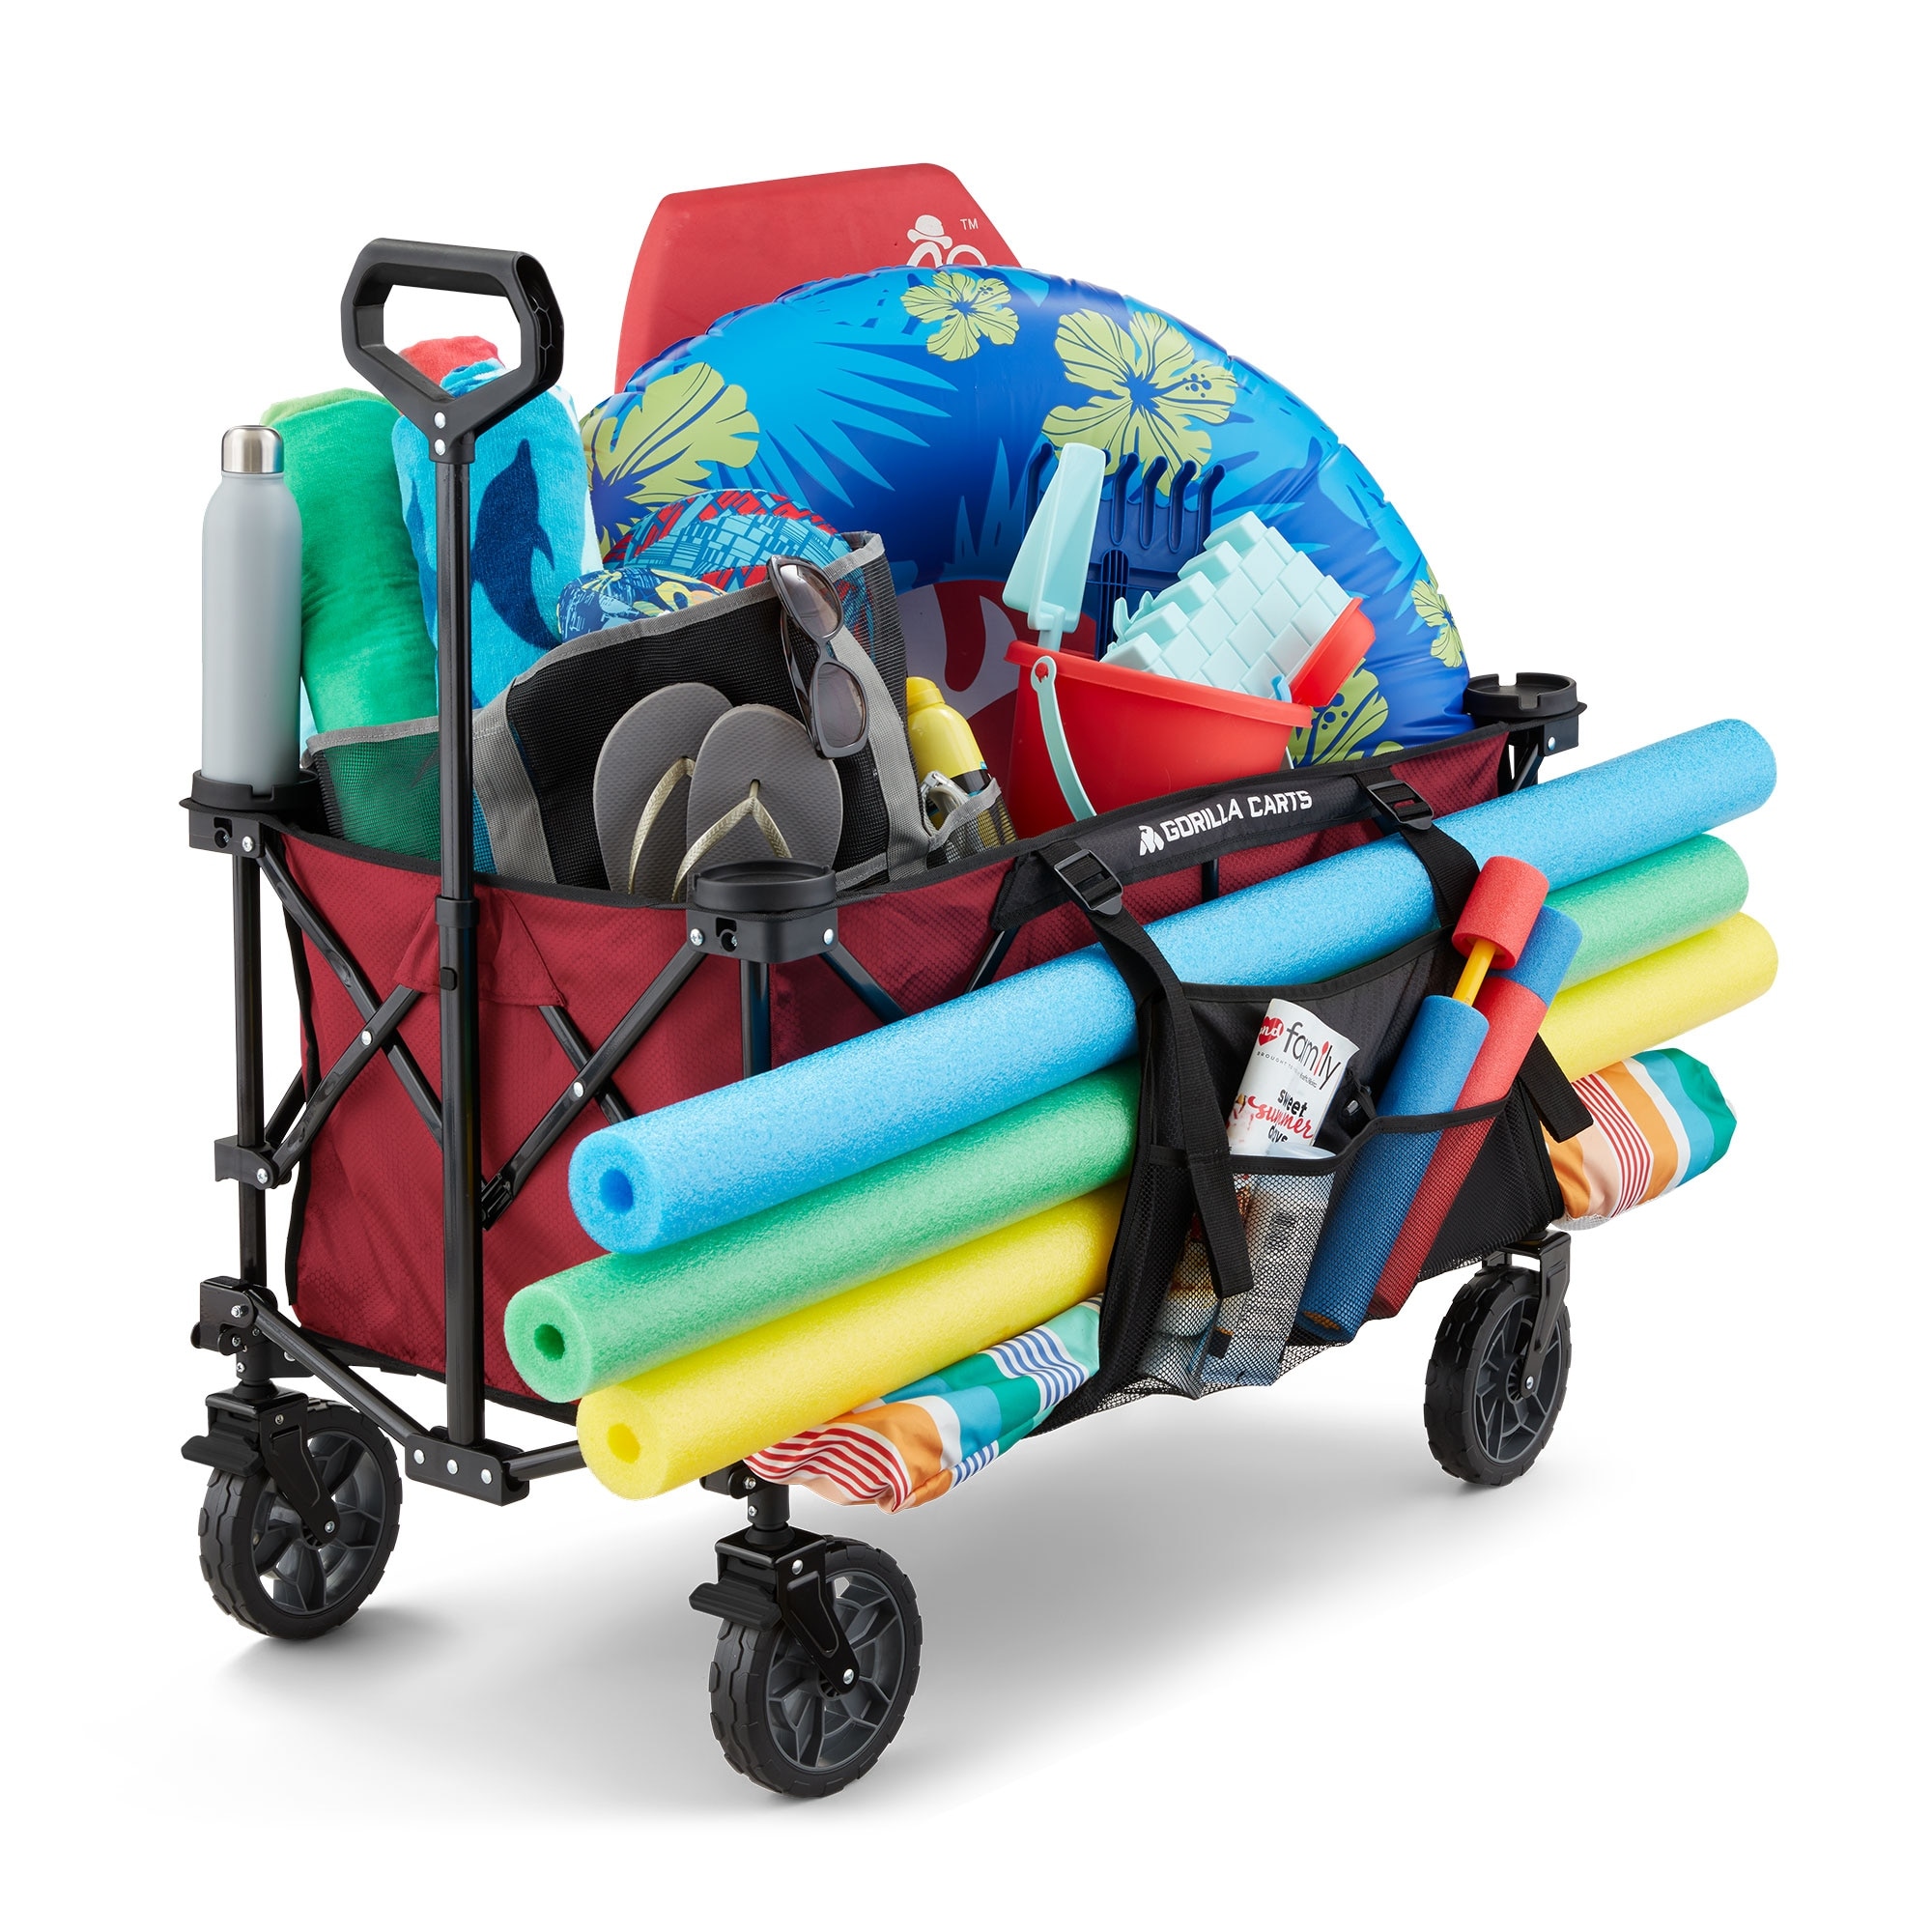 https://ak1.ostkcdn.com/images/products/is/images/direct/74e579c7e7326fbf3b2c6a51476671de966e2b9a/Gorilla-Carts-7-Cubic-Feet-Foldable-Utility-Beach-Wagon-w--Oversized-Bed%2C-Red.jpg